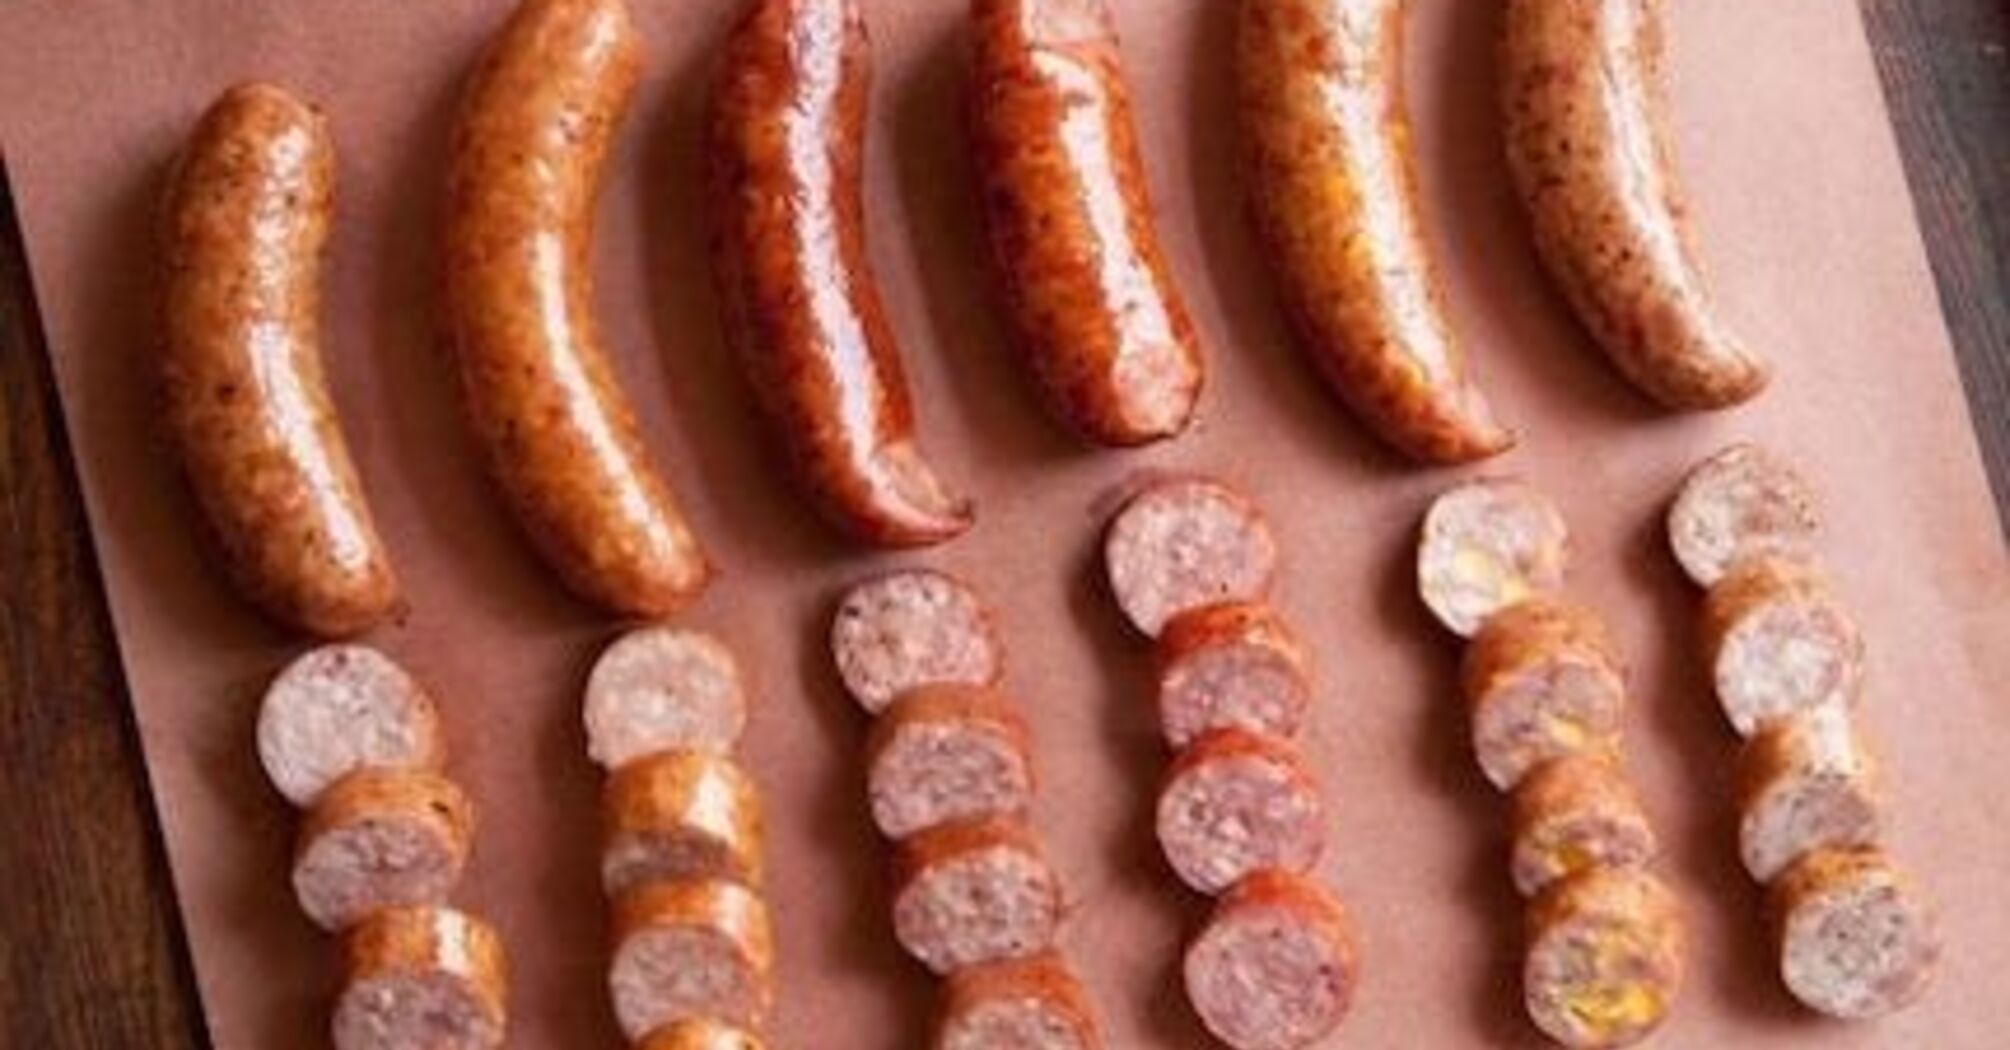 How to check a sausage for quality